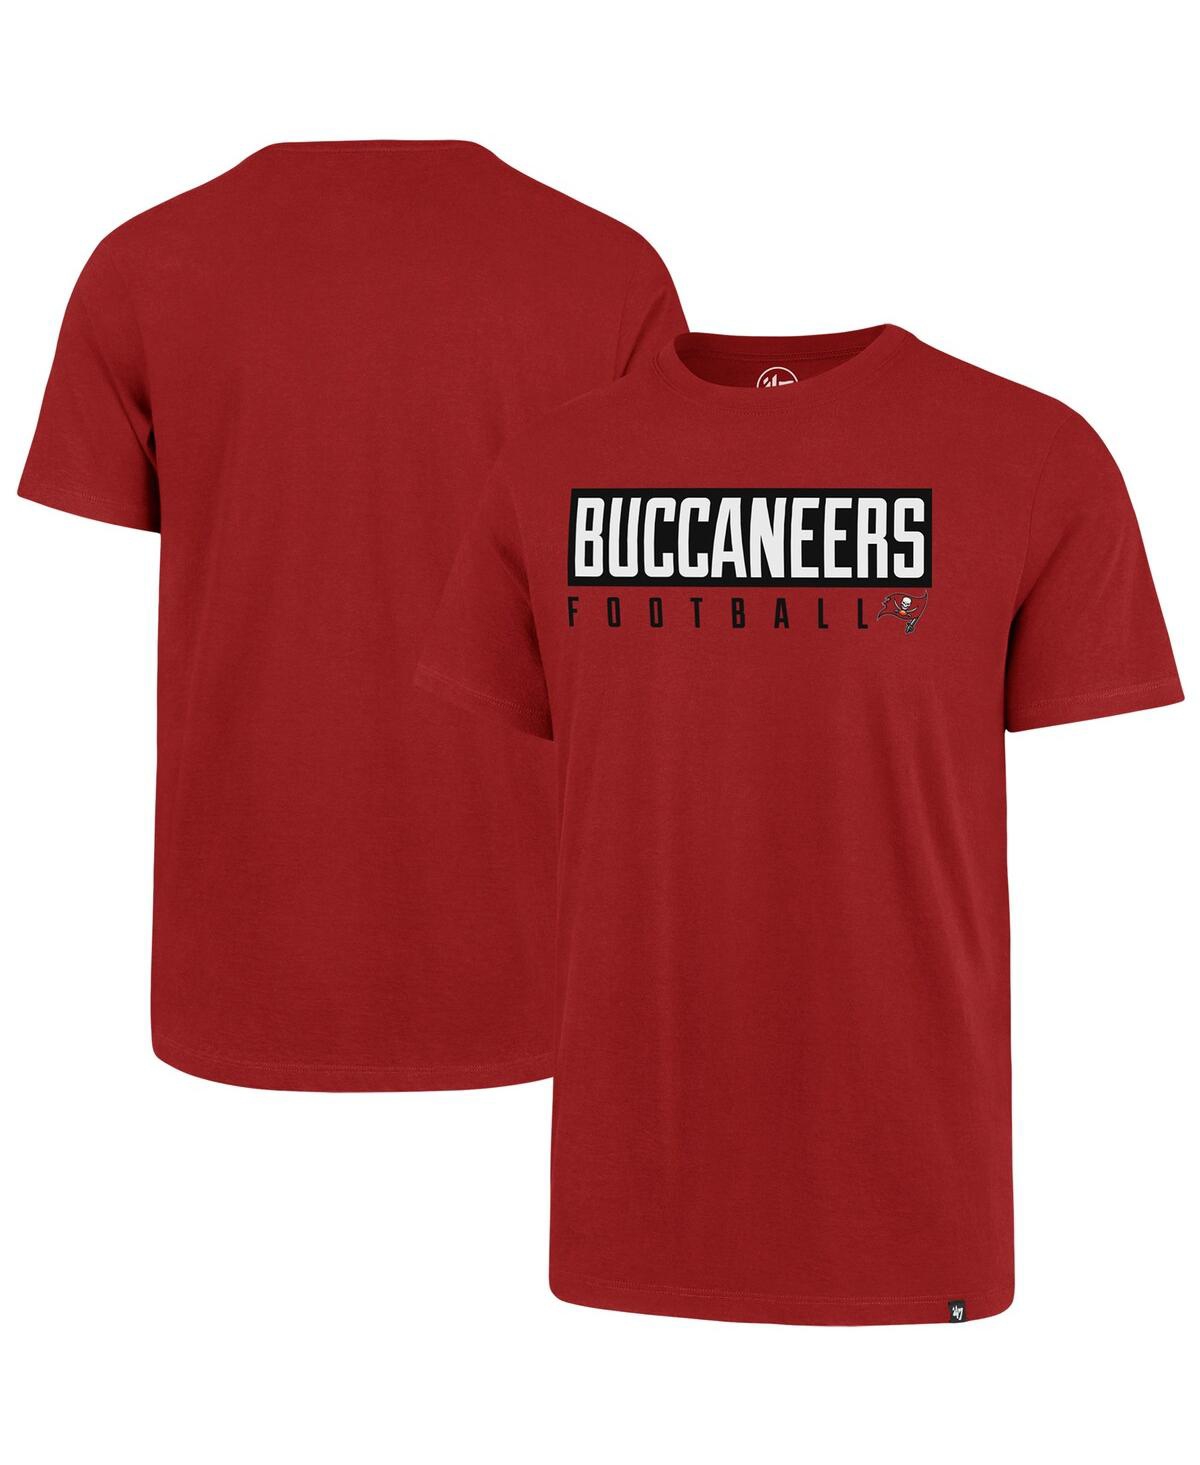 Men's '47 Brand Red Tampa Bay Buccaneers Dub Major Super Rival T-shirt - Red